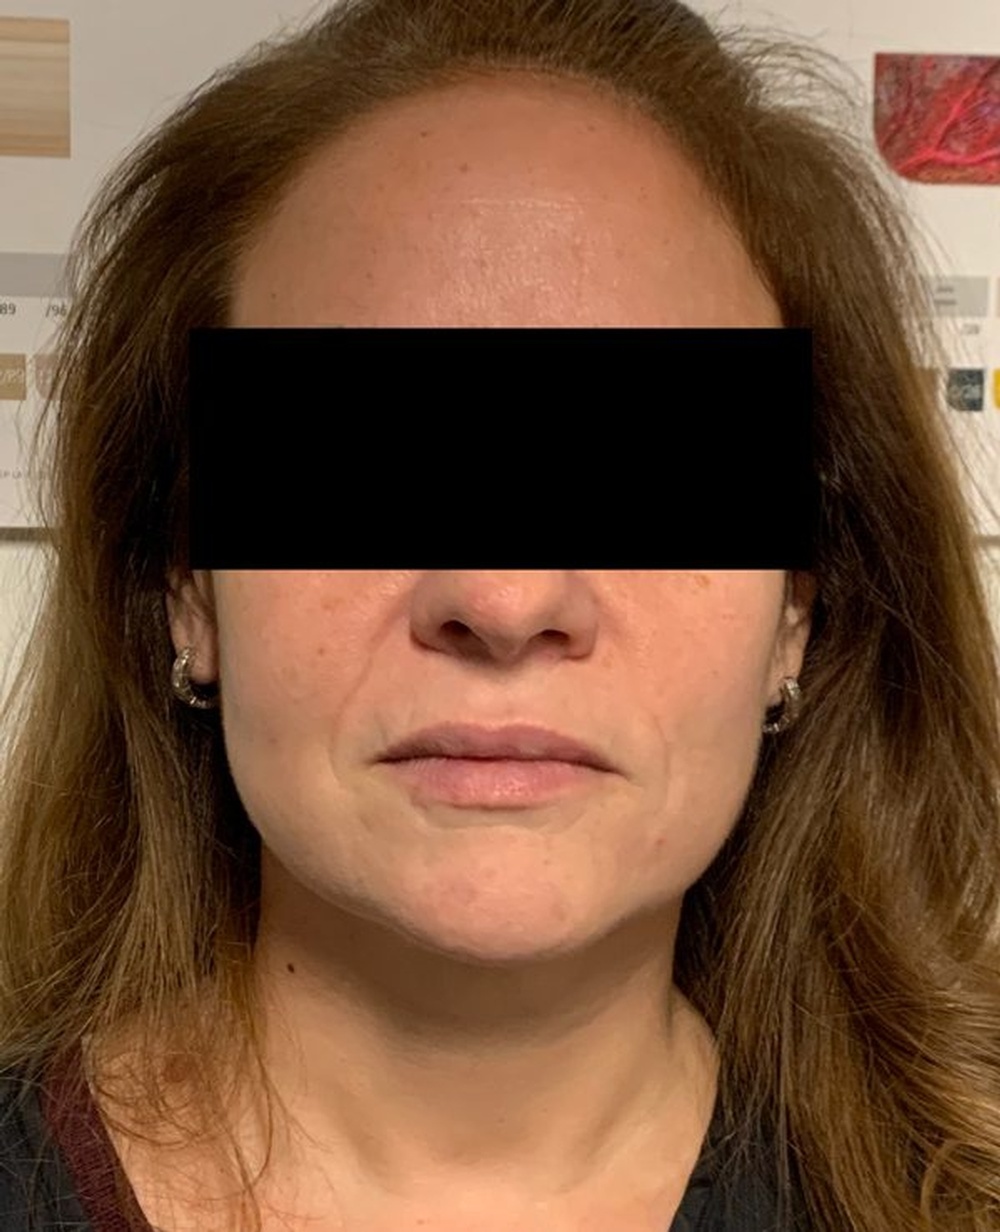 Face before Cheeck Volumization loses volume due to reduced fat and muscle mass